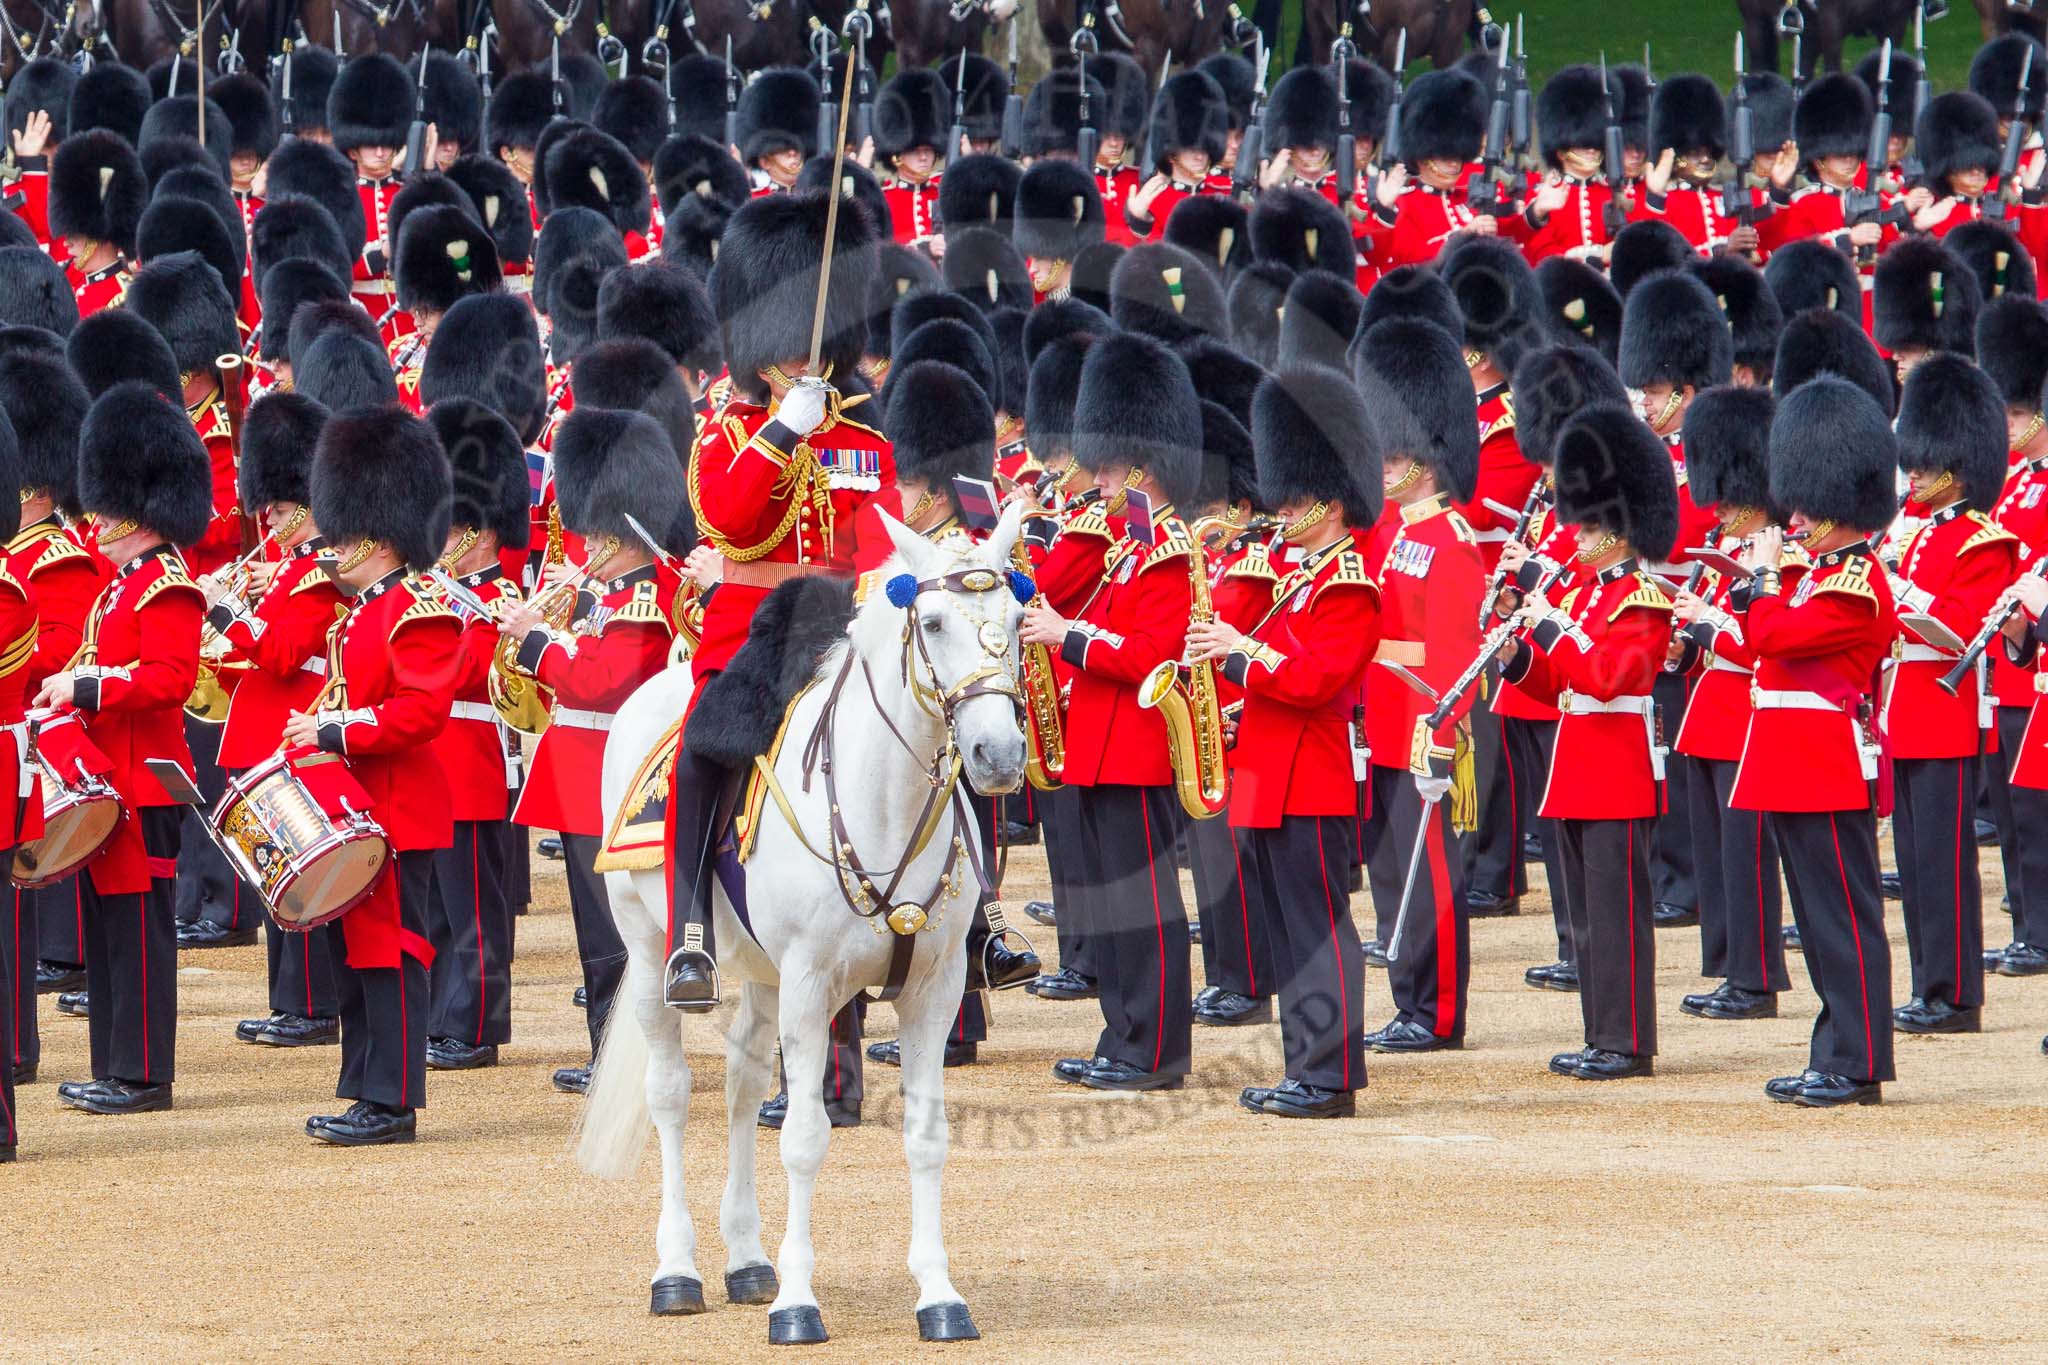 Trooping the Colour 2014.
Horse Guards Parade, Westminster,
London SW1A,

United Kingdom,
on 14 June 2014 at 11:25, image #555